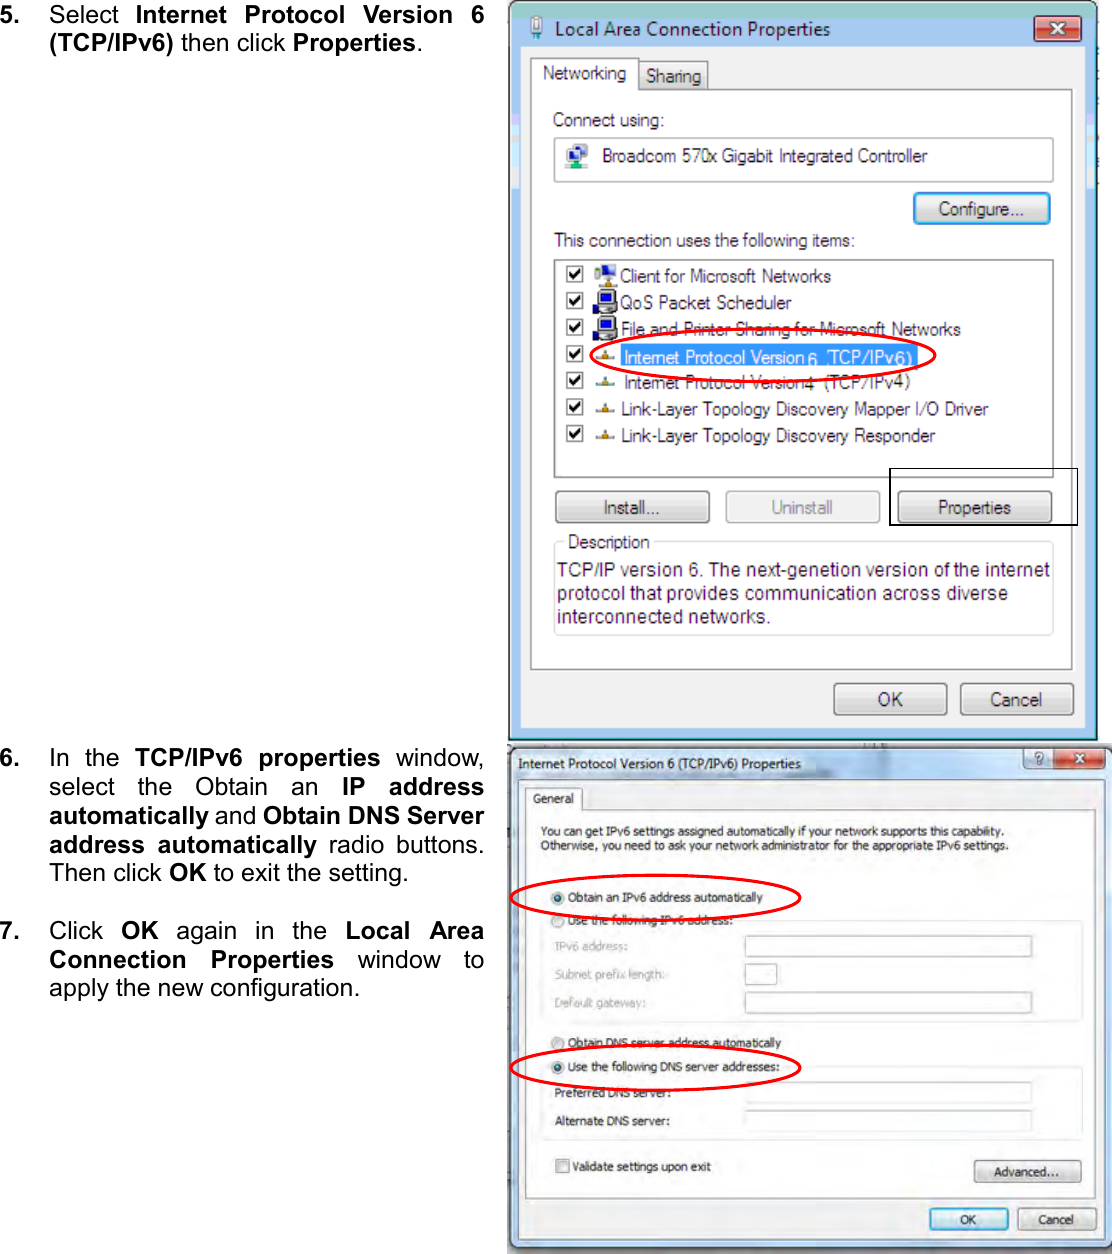   5. Select  Internet  Protocol  Version  6 (TCP/IPv6) then click Properties.  6. In  the  TCP/IPv6  properties  window, select  the  Obtain  an  IP  address automatically and Obtain DNS Server address  automatically  radio  buttons. Then click OK to exit the setting.  7. Click  OK  again  in  the  Local  Area Connection  Properties  window  to apply the new configuration.   